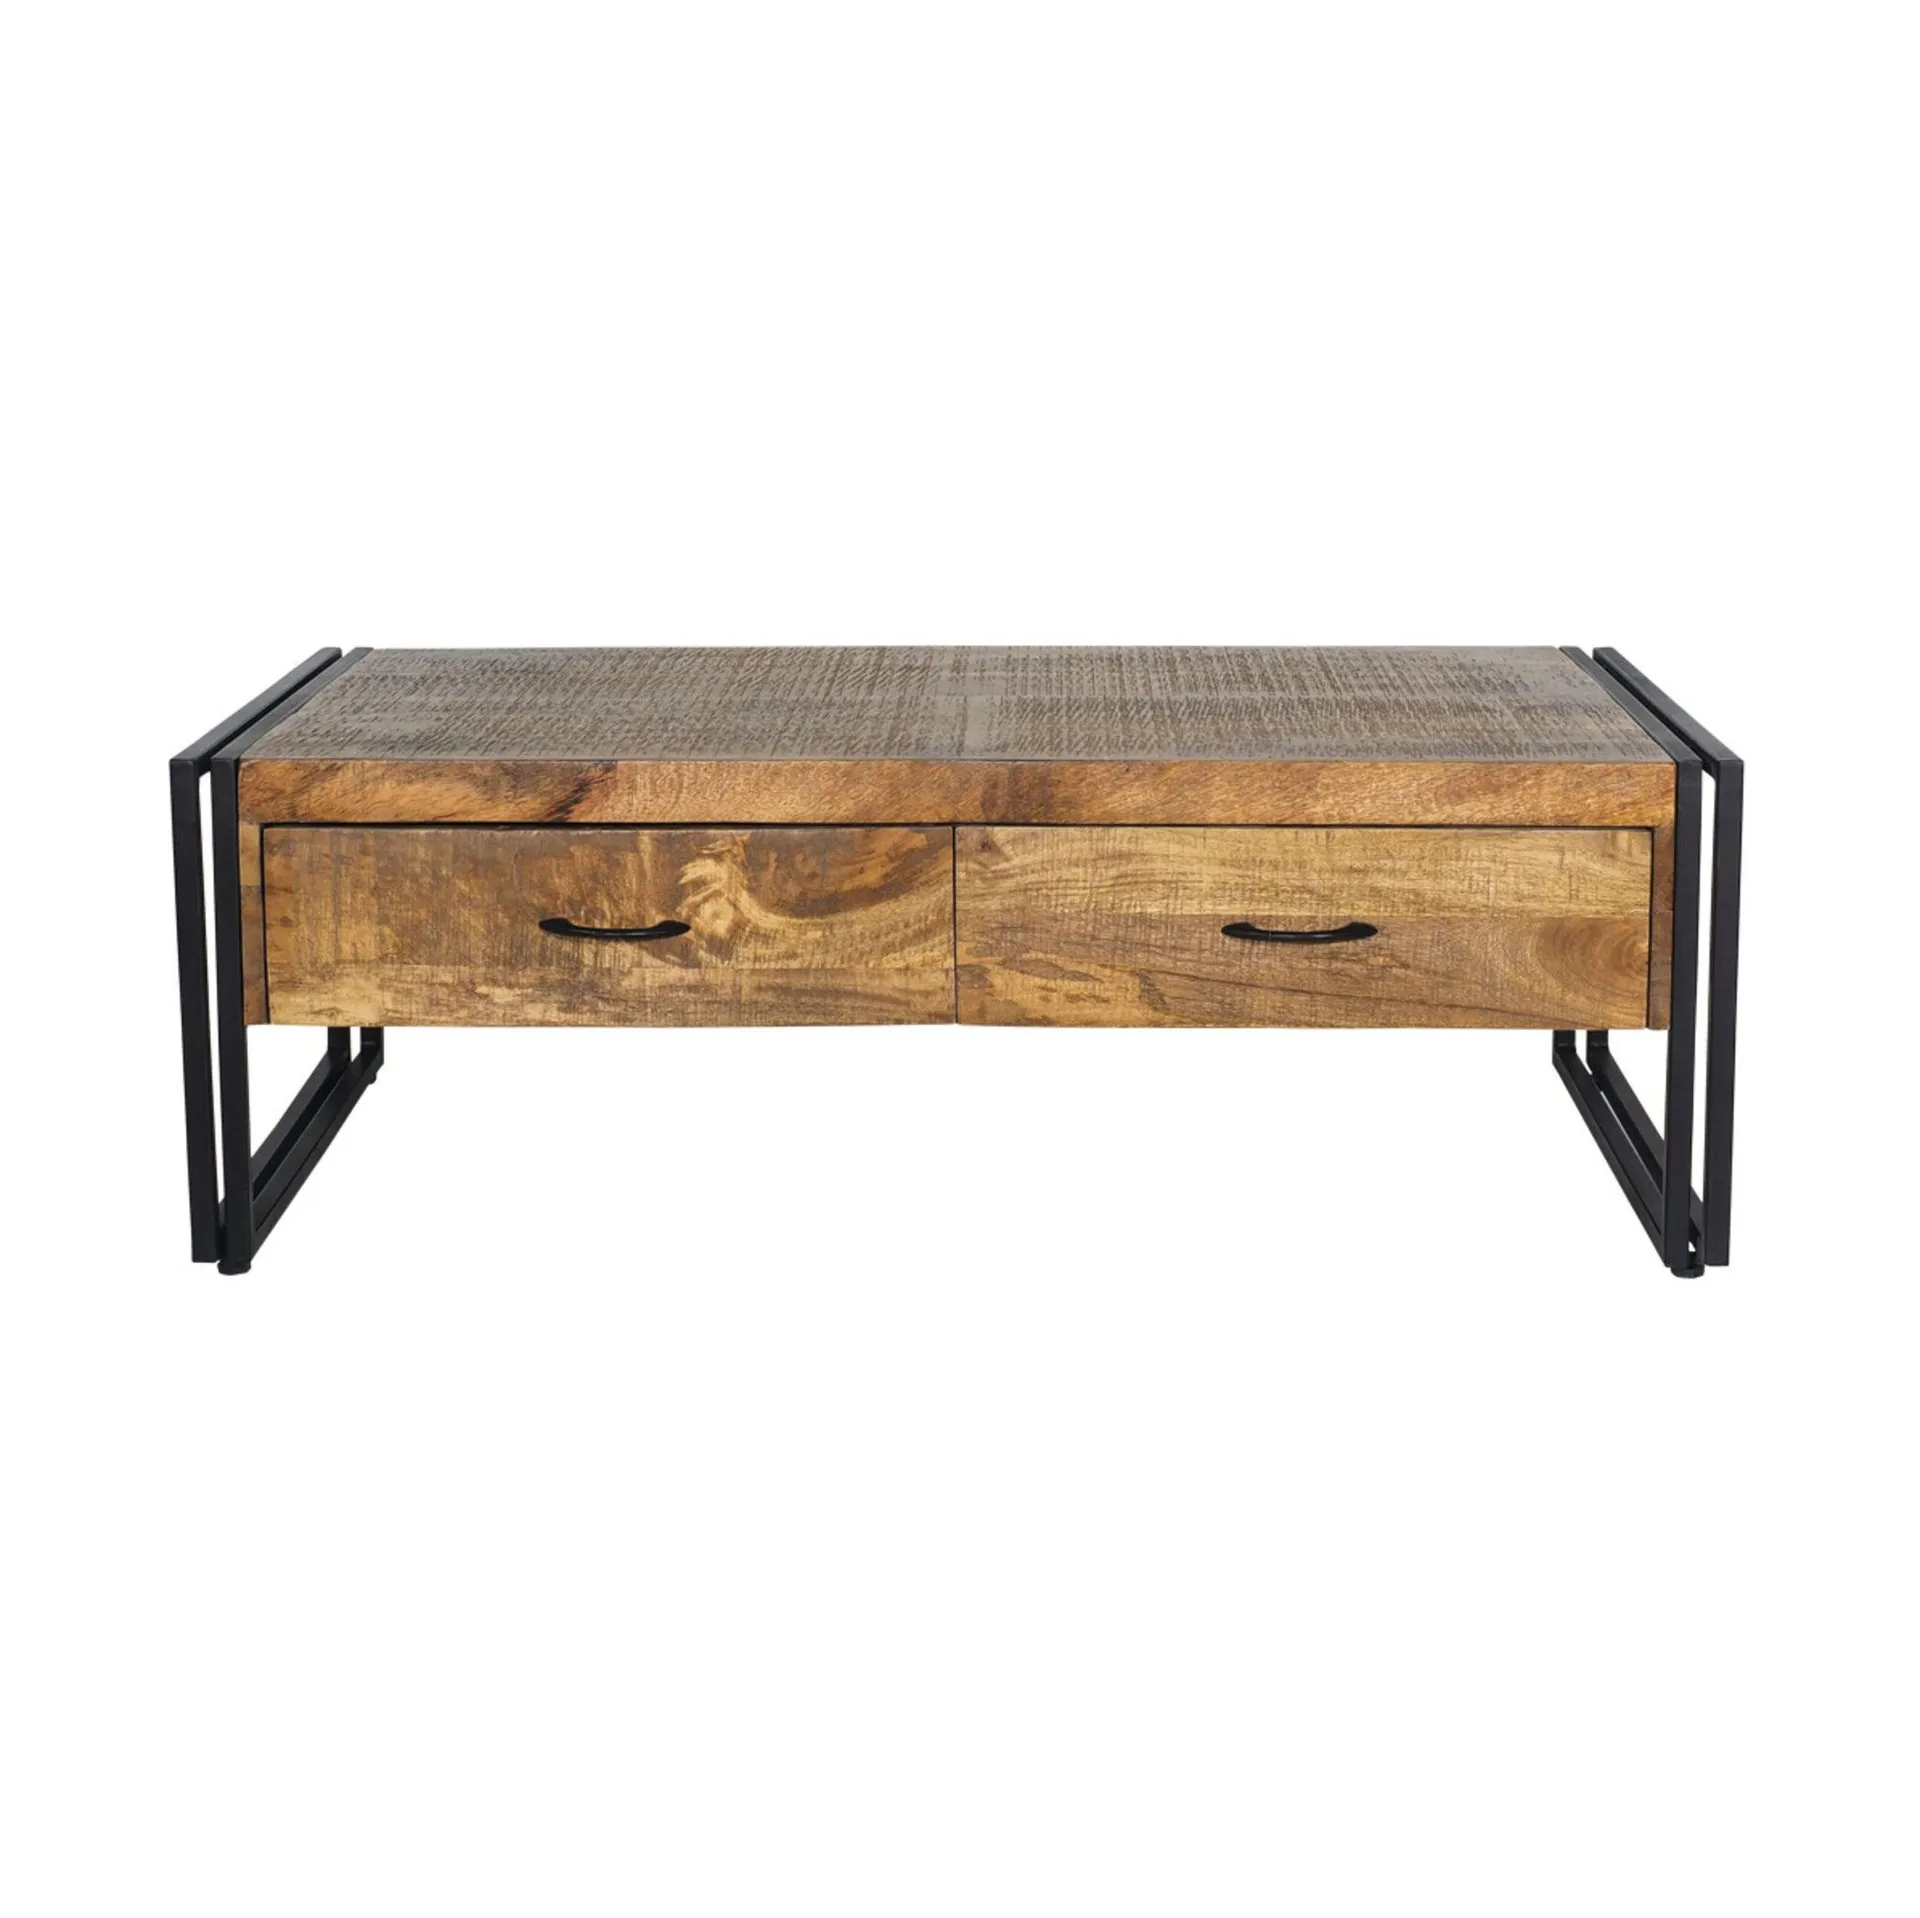 Fulham 4 Drawer Coffee Table